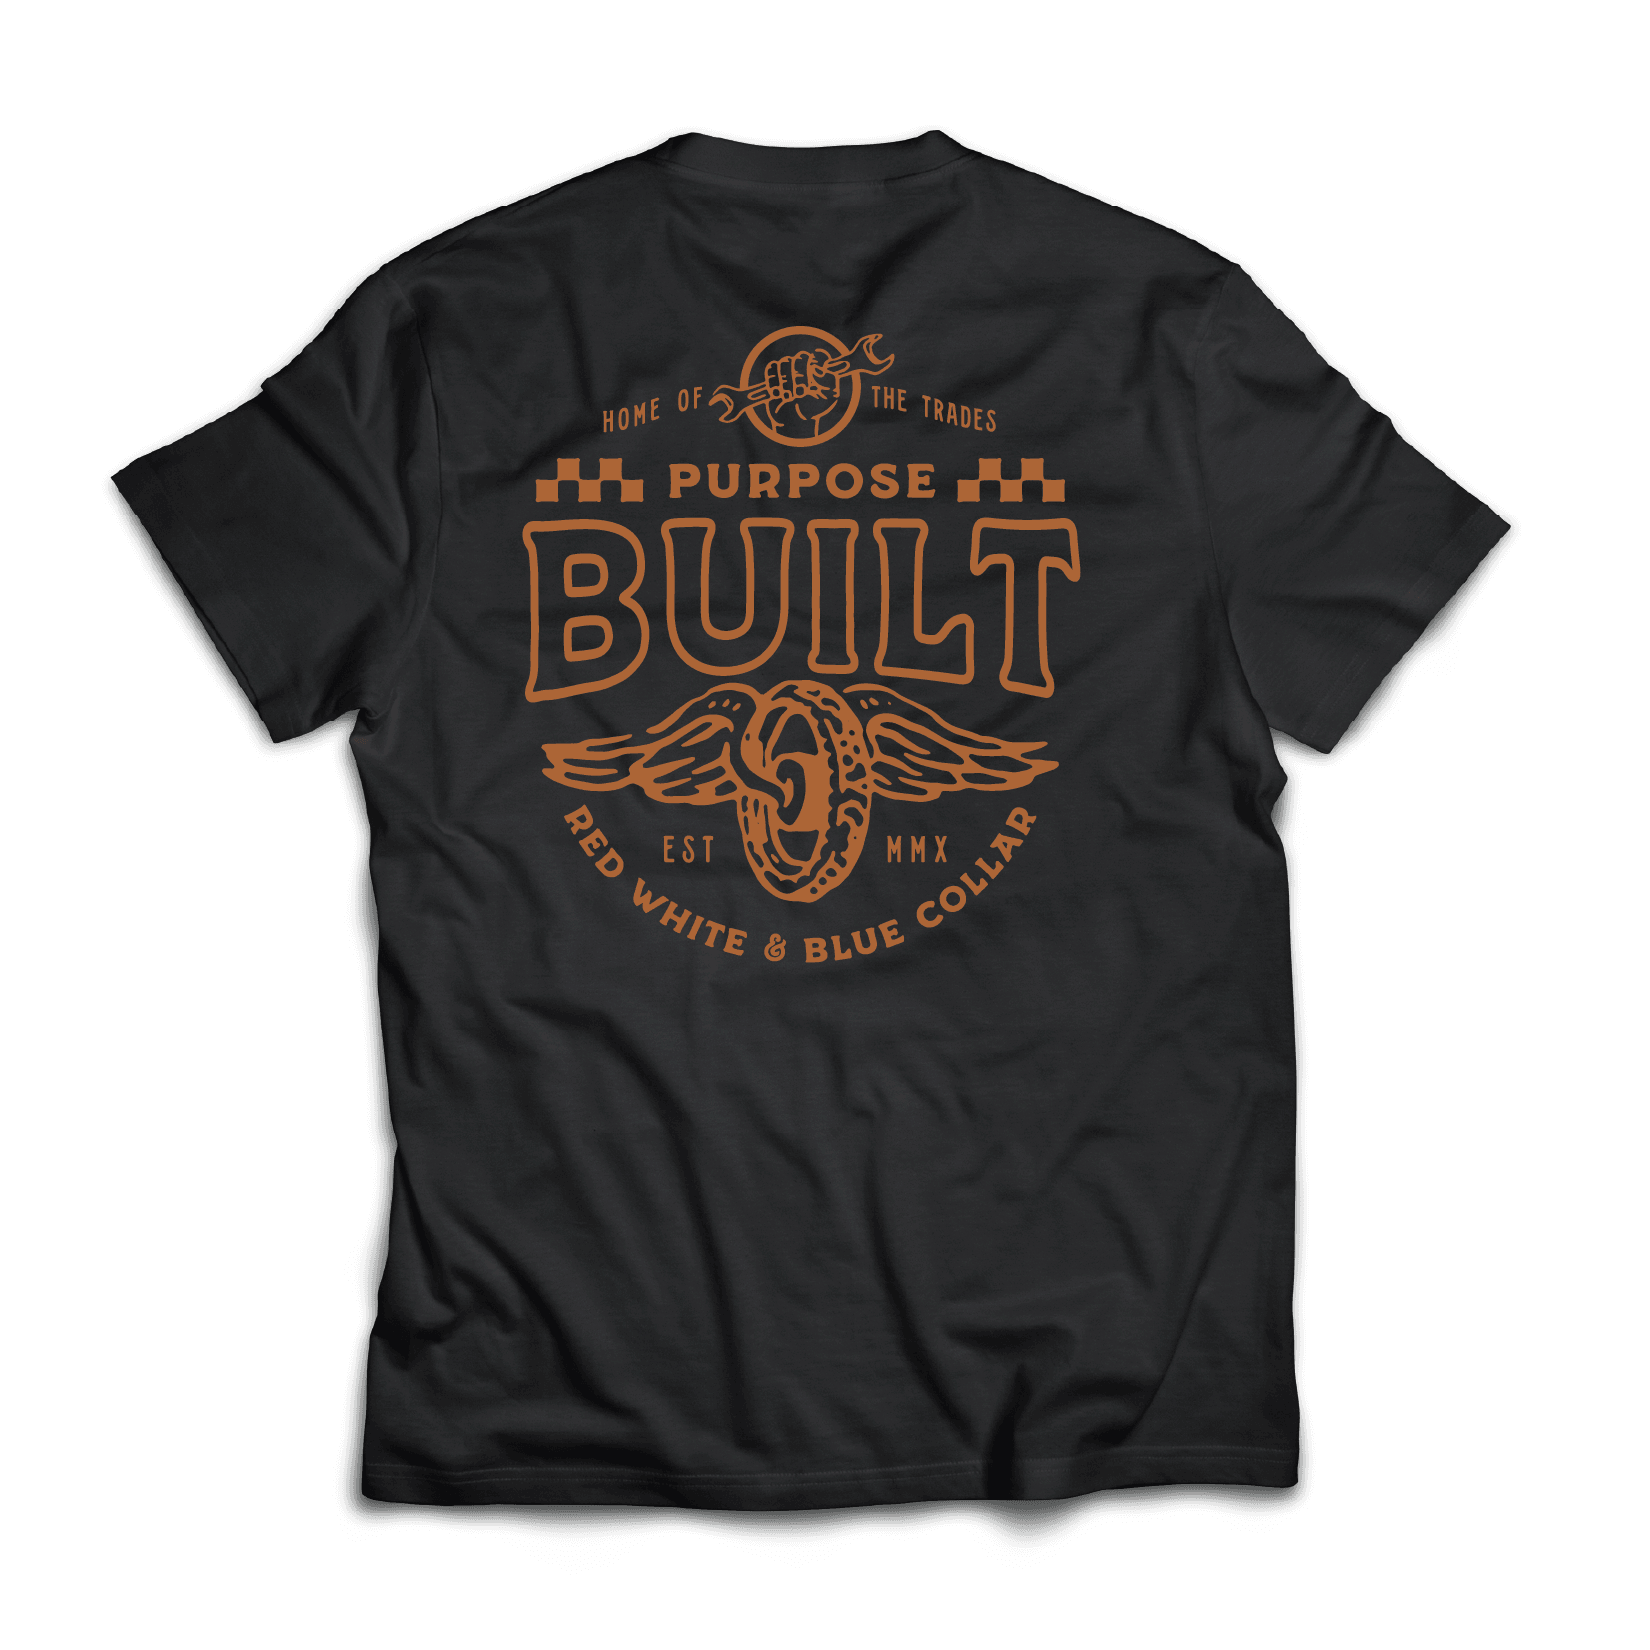 Youth Live Fast Tee, Black - Purpose-Built / Home of the Trades